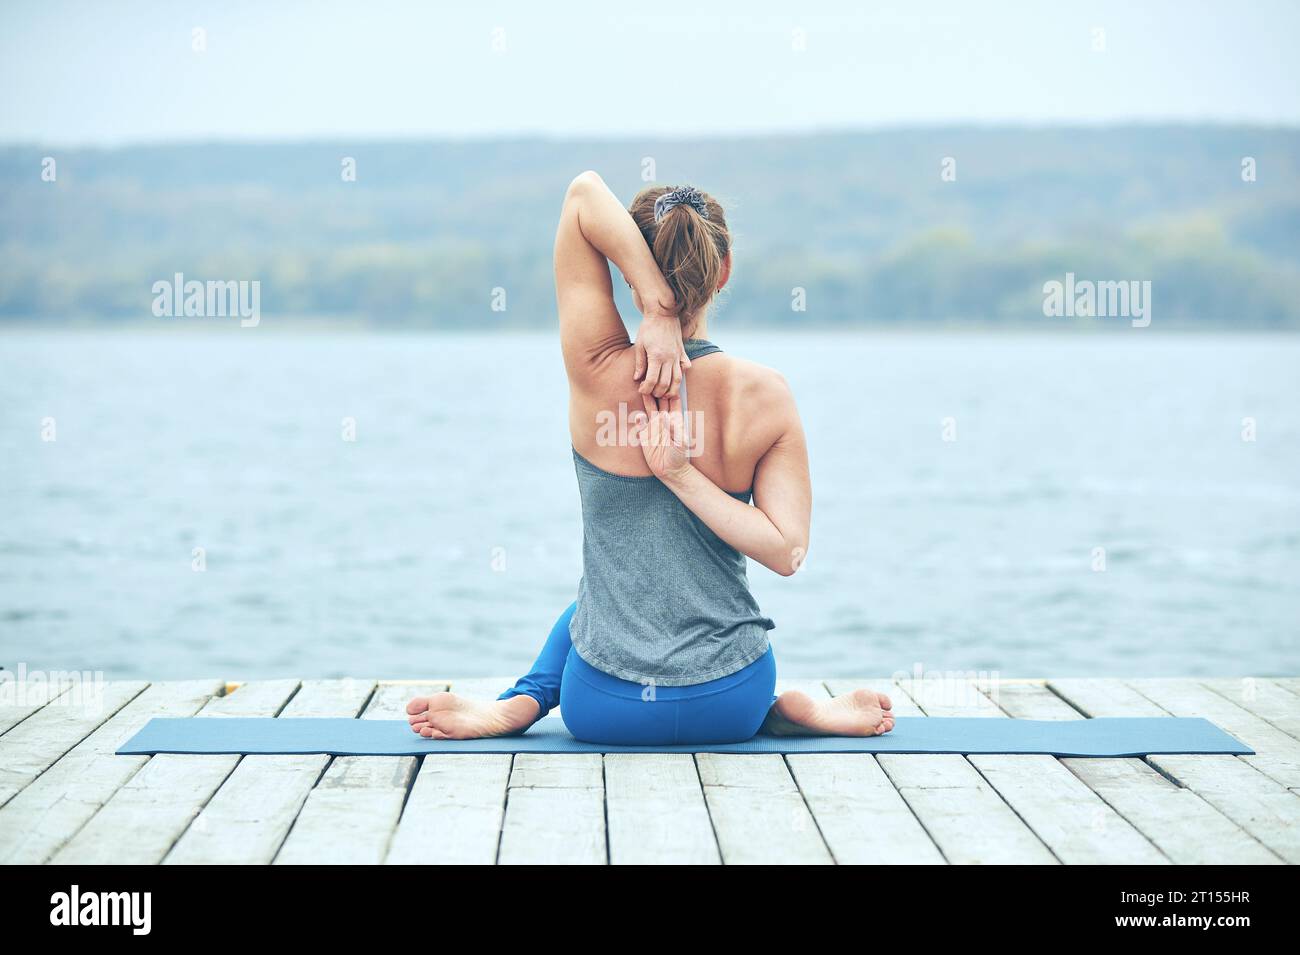 Beautiful young woman practices yoga asana Gomukhasana - Cow face pose on the wooden deck near the lake. Stock Photo